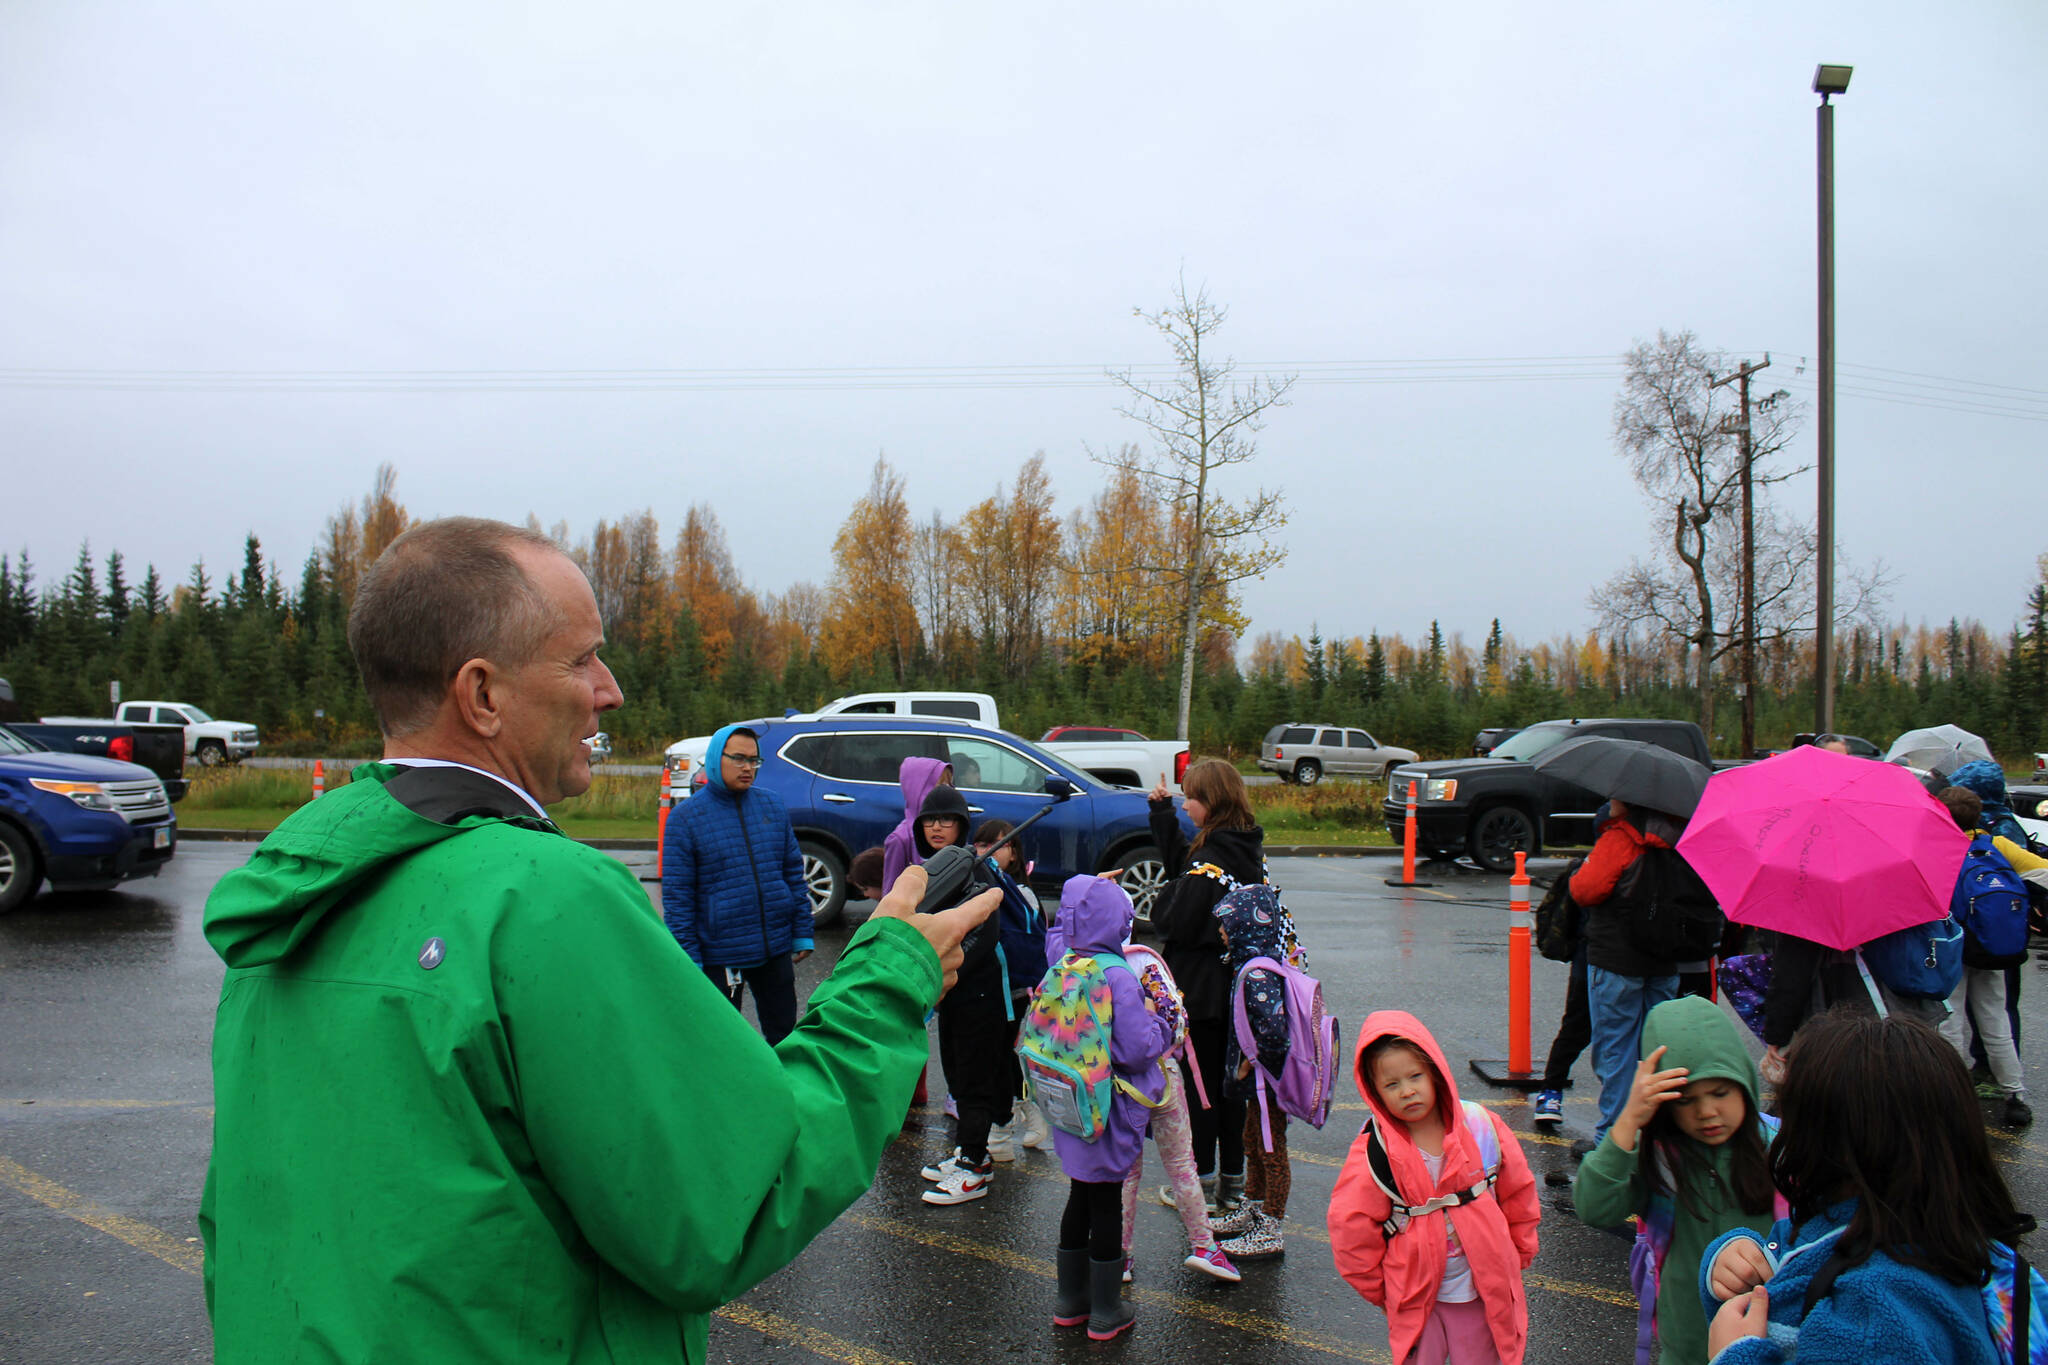 Mountain View Elementary School Principal Karl Kircher (green) helps direct student pick up traffic at the end of the school day on Thursday, Sept. 29, 2022, in Kenai, Alaska. (Ashlyn O’Hara/Peninsula Clarion)